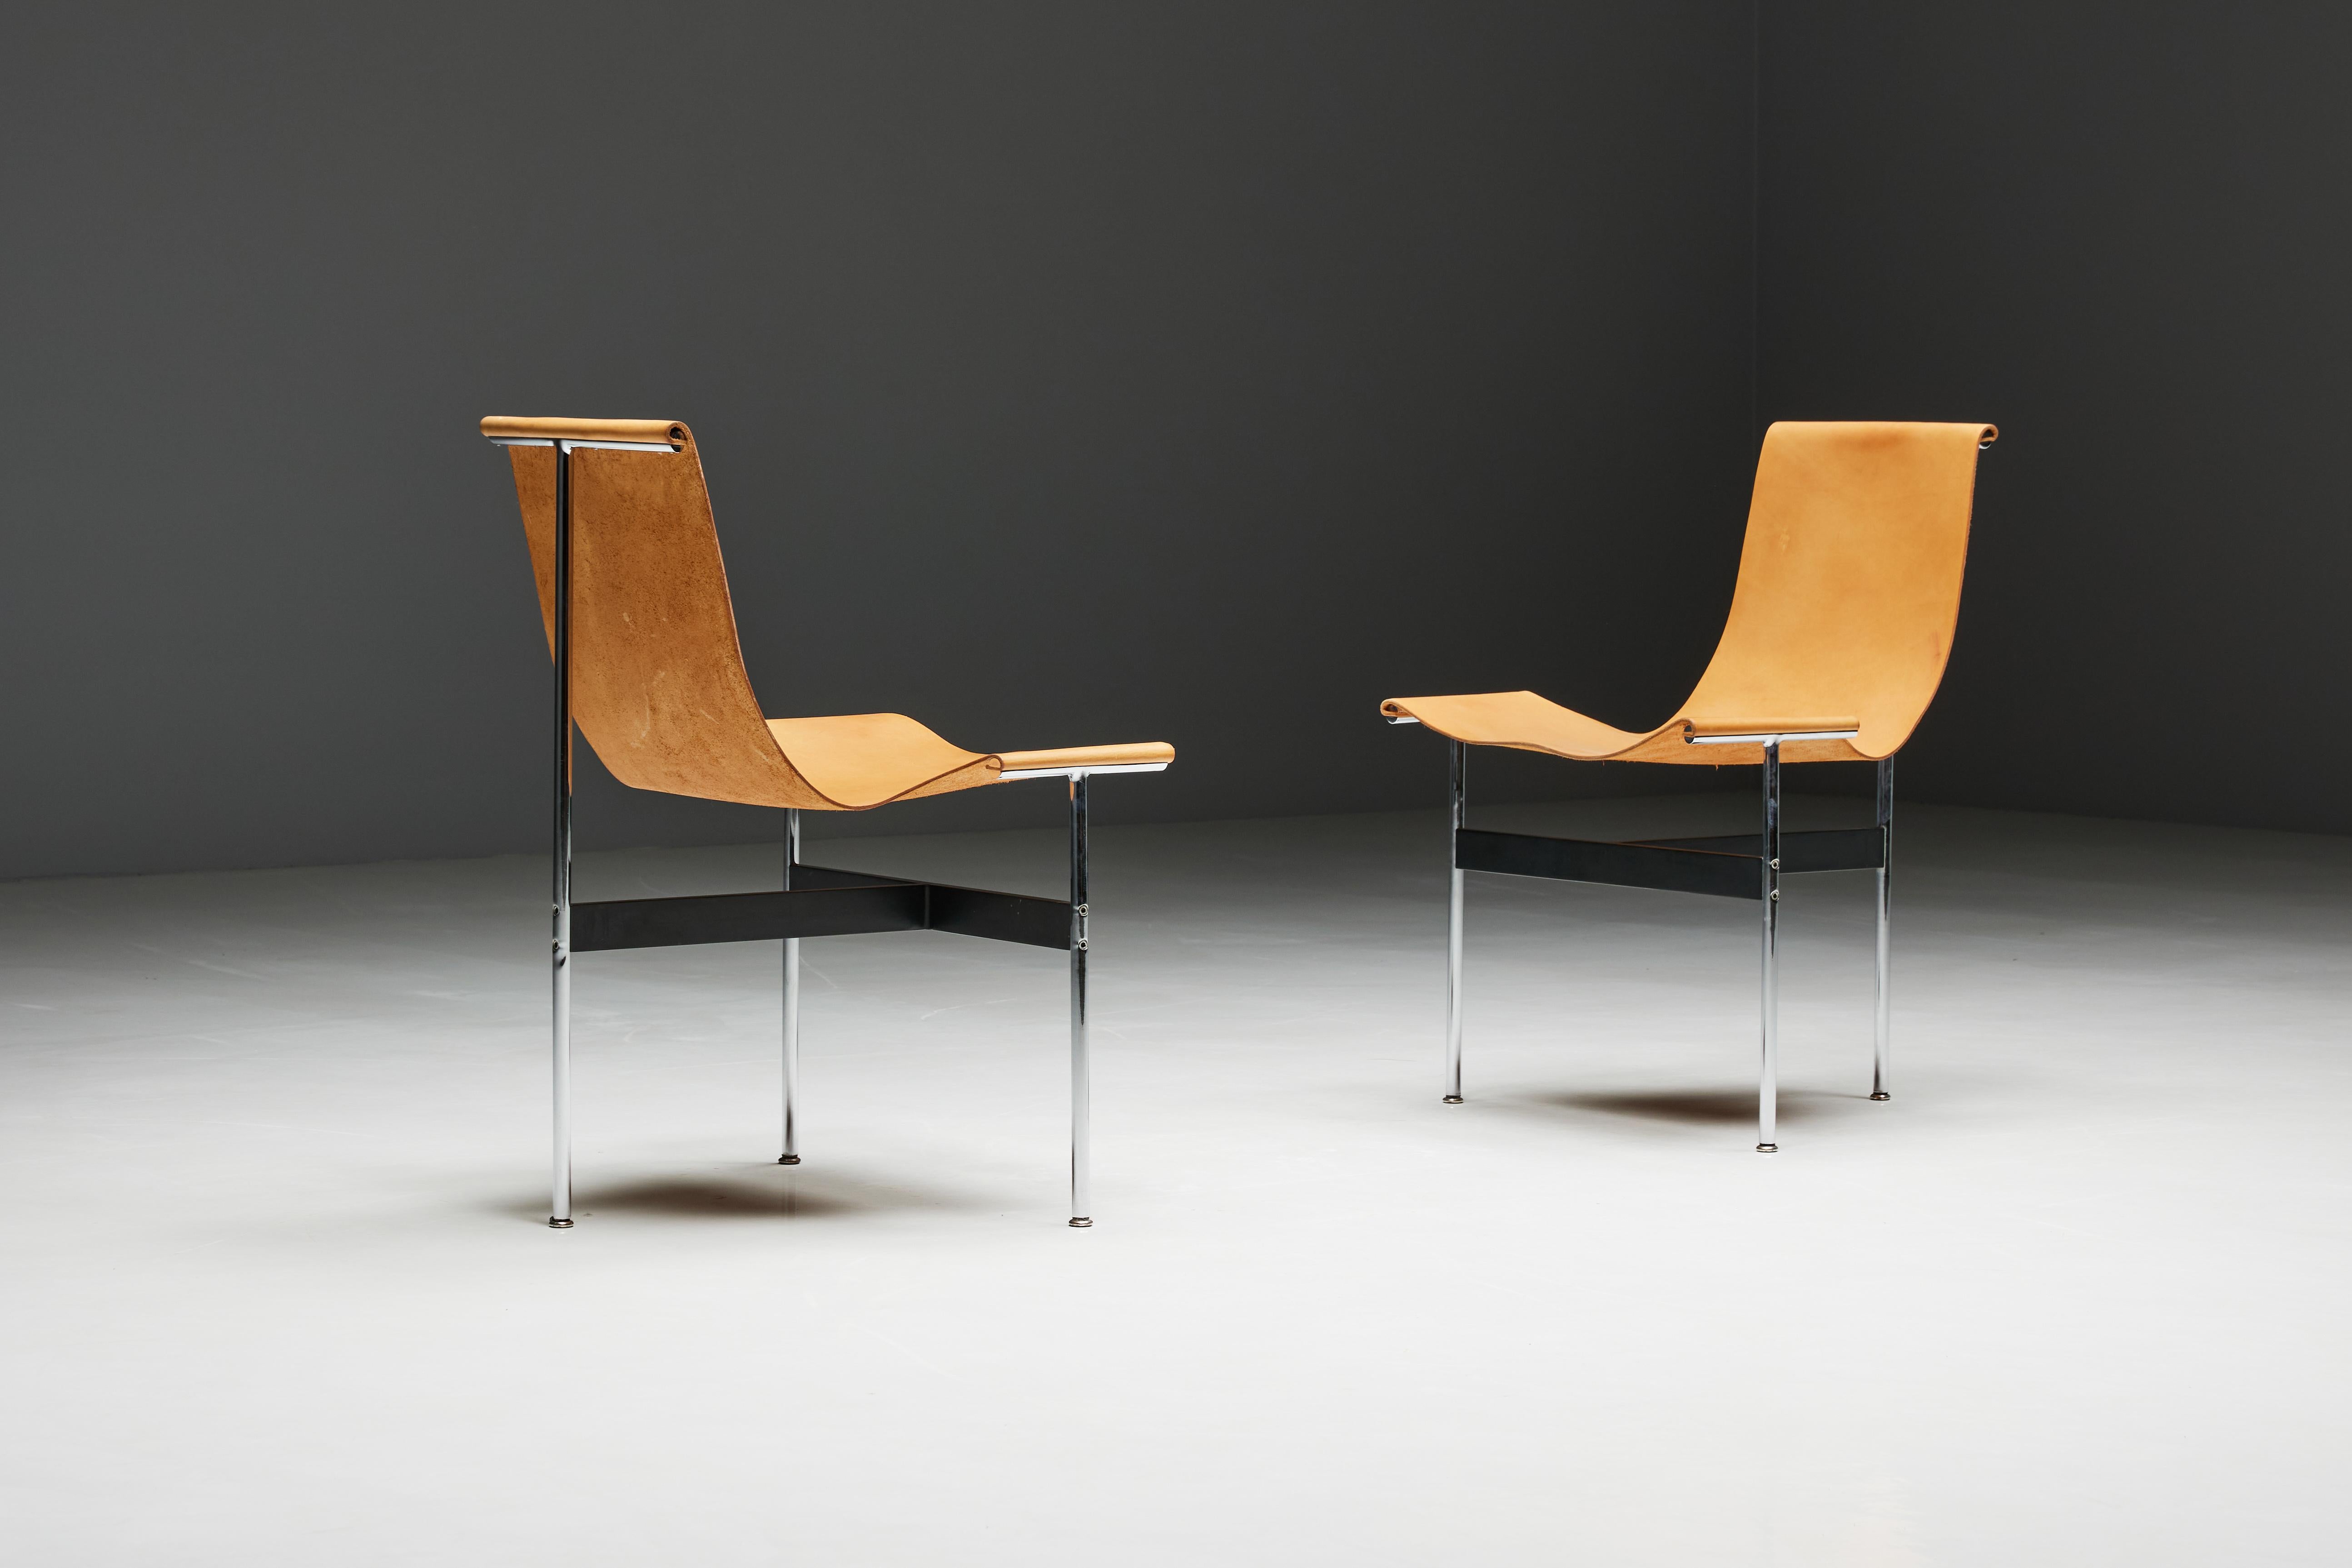 T-Chairs by Katavolos, Kelley & Littell for Laverne International, US, 1950s For Sale 2